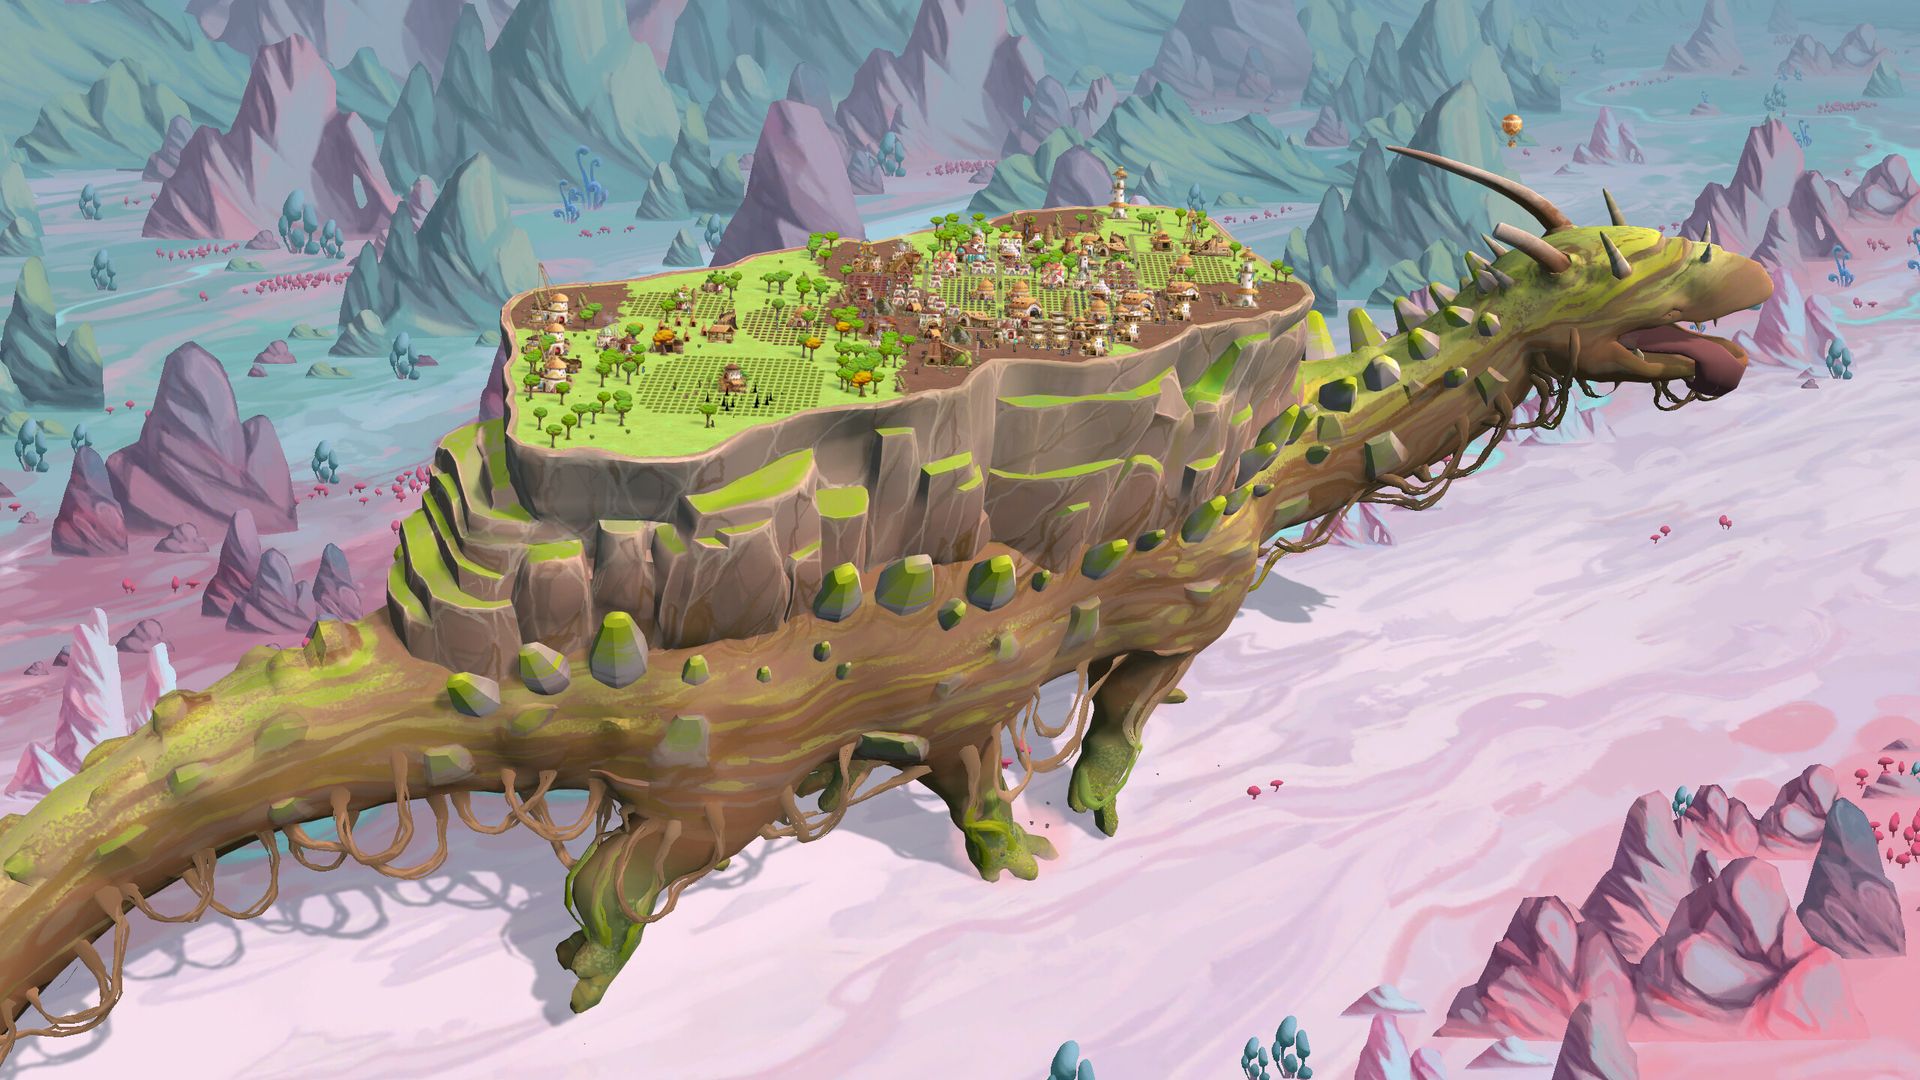 Video game screenshot of a giant four-legged beast with a village on its back